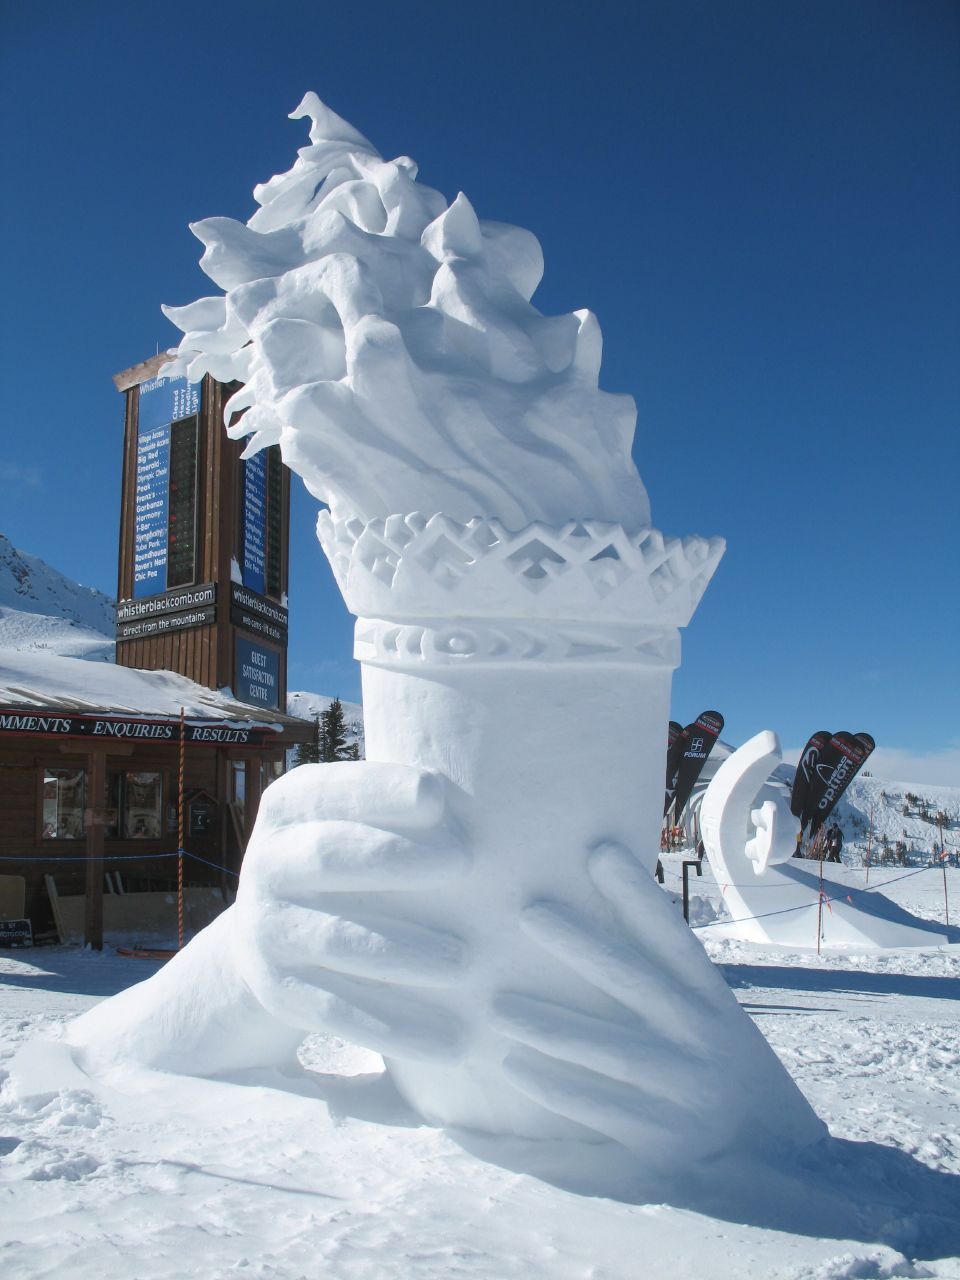 olympic ice sculpting - w Decor Amway Prol fortune Sony Loret Roundhouse Bere On whistlerblackcomb.com direct from the mountains Mments Enquiries Results option